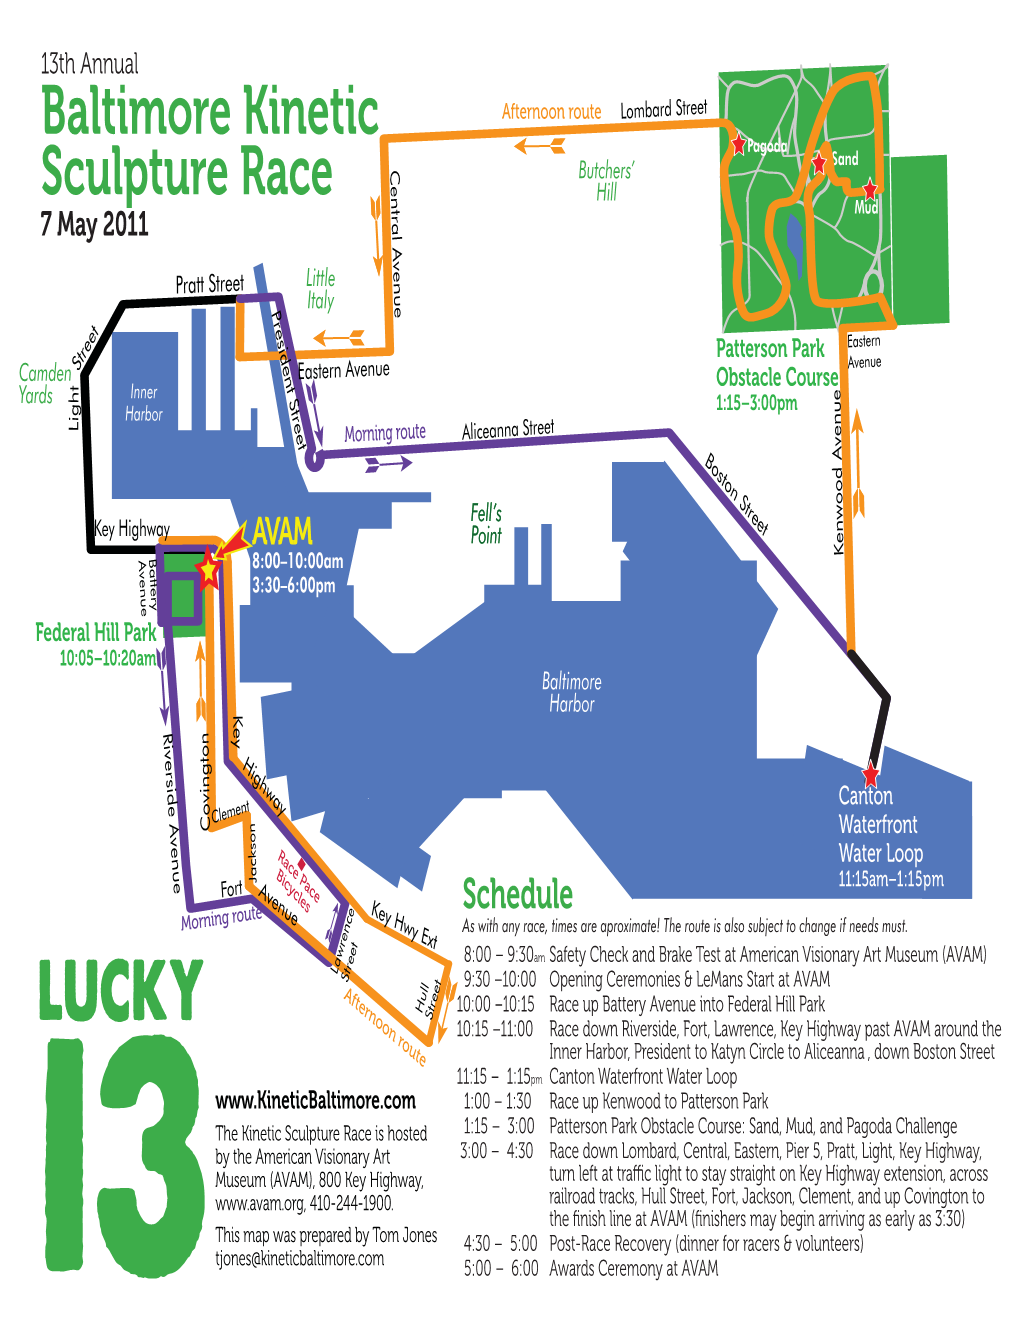 2011 Baltimore Kinetic Sculpture Race Spectator's Guide